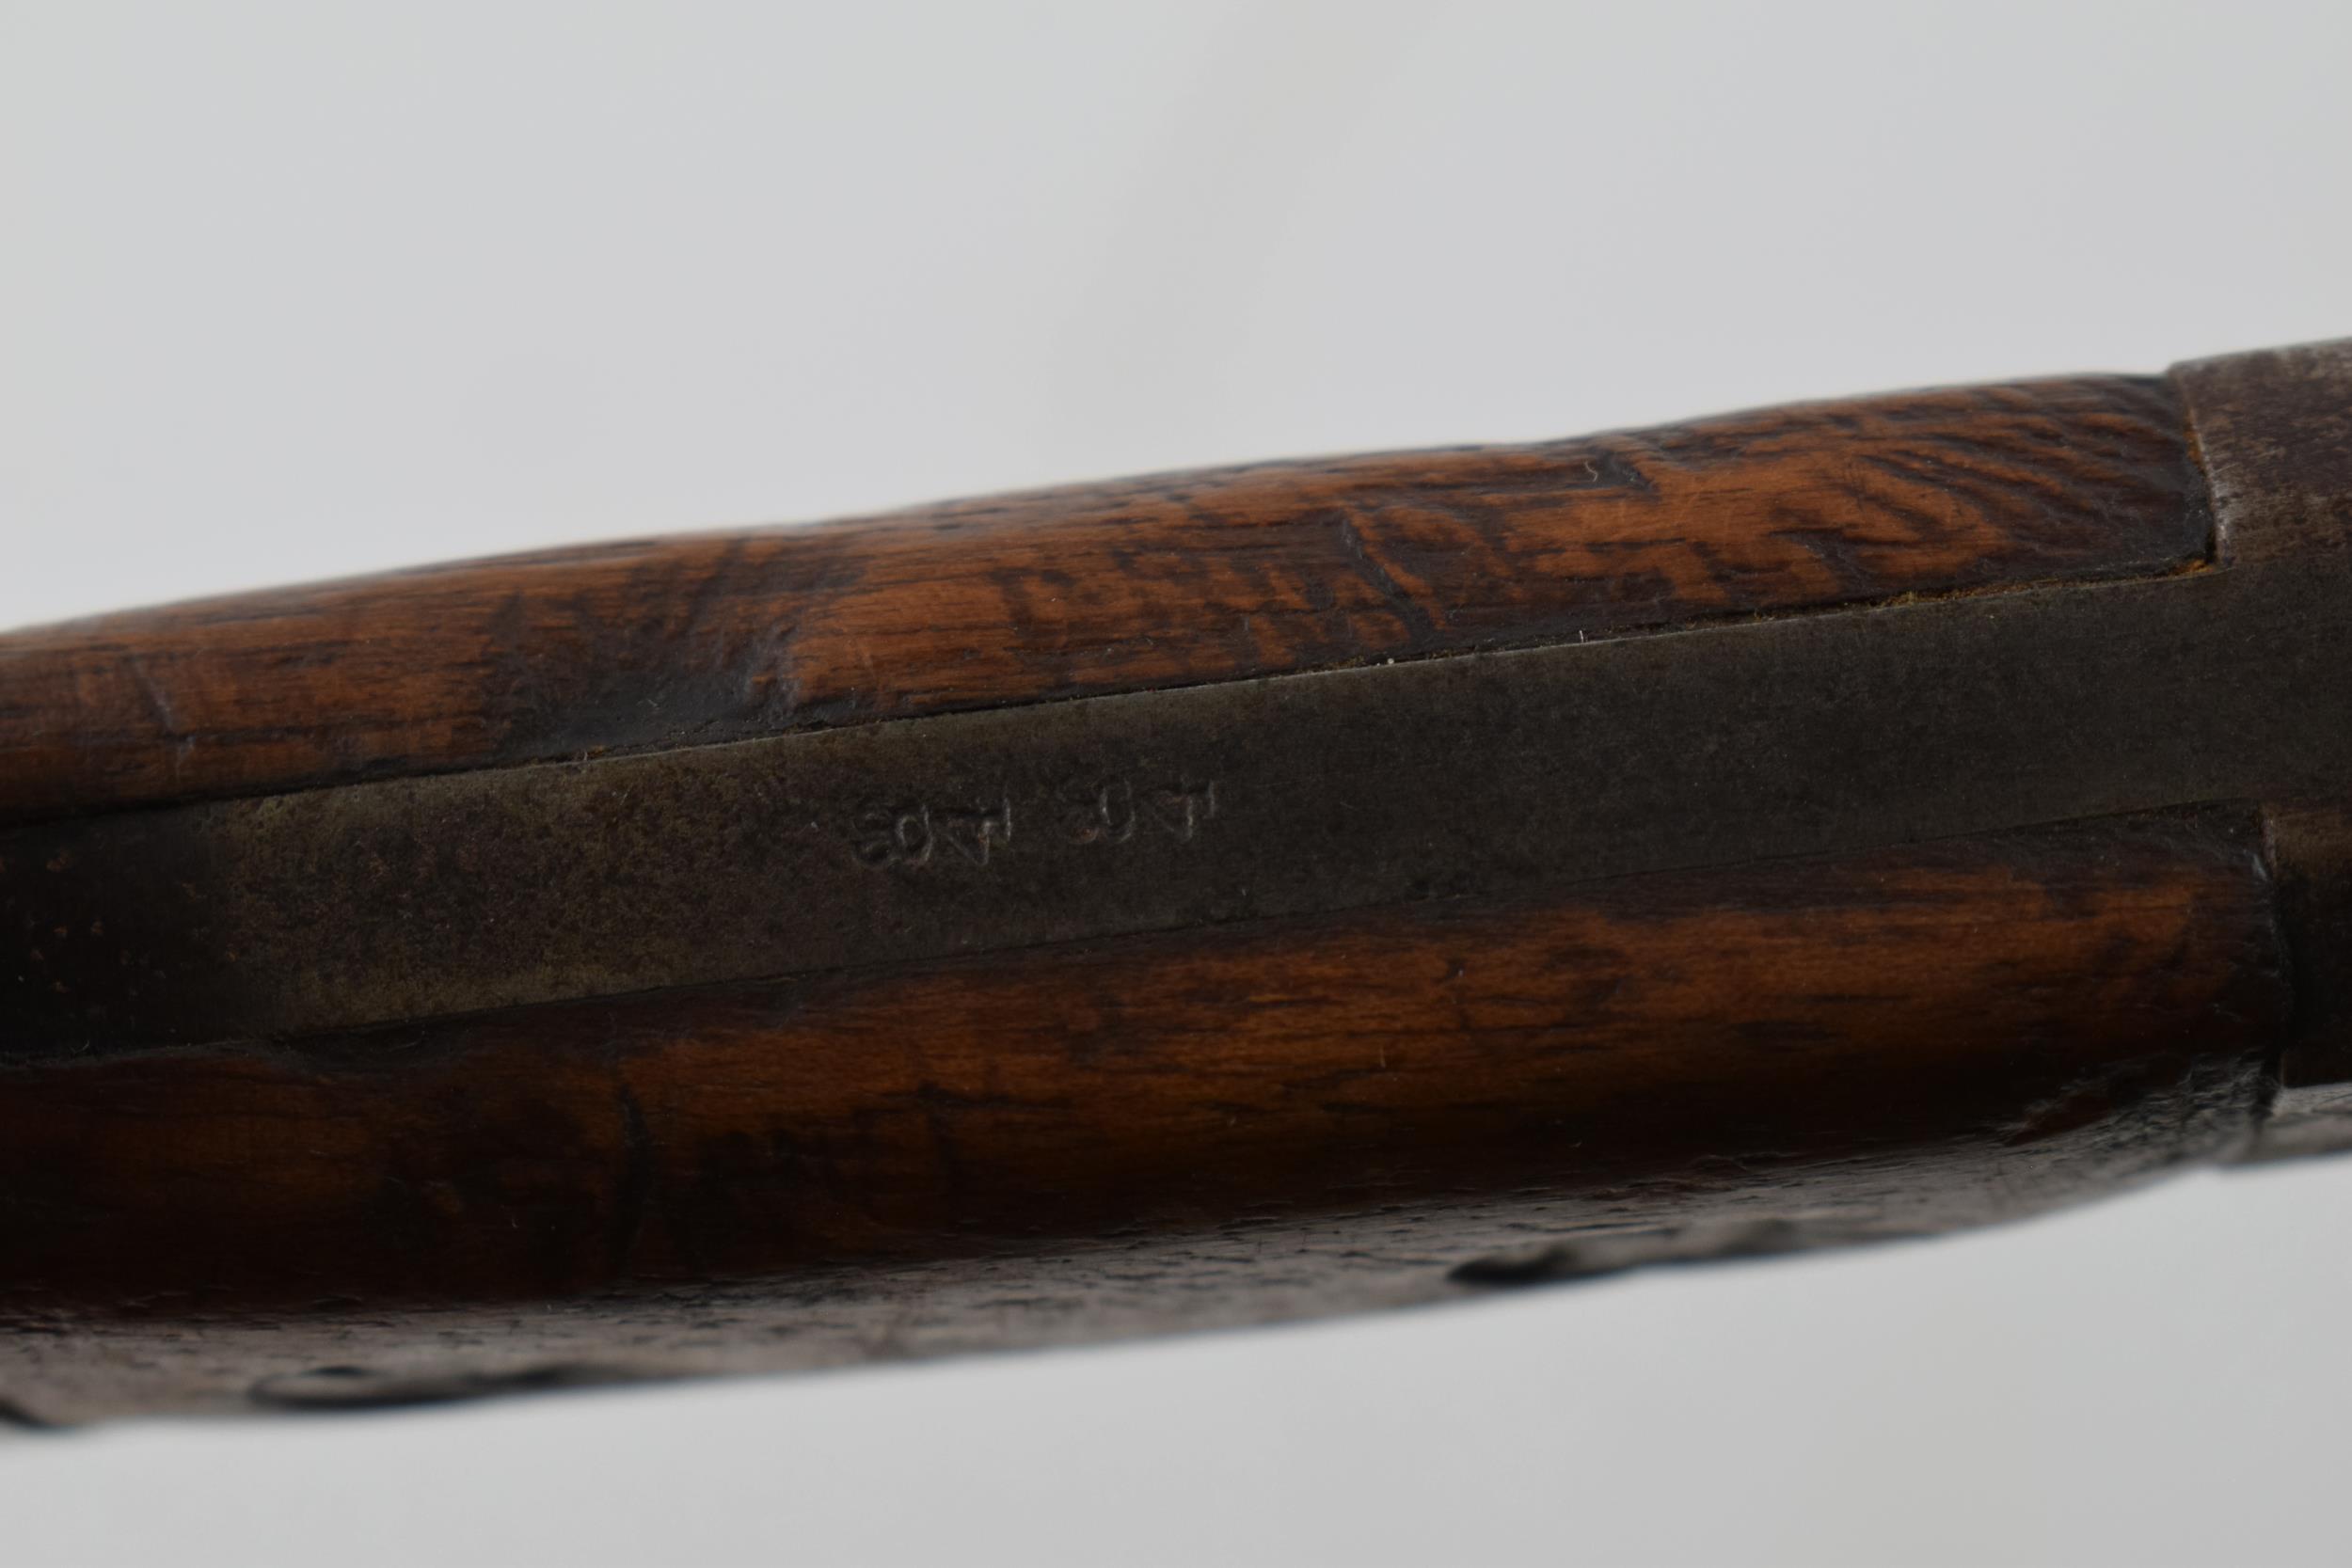 World War One bayonet by Ross Rifle Co, Quebec Canada, 1907 patent, 37cm long. - Image 4 of 6